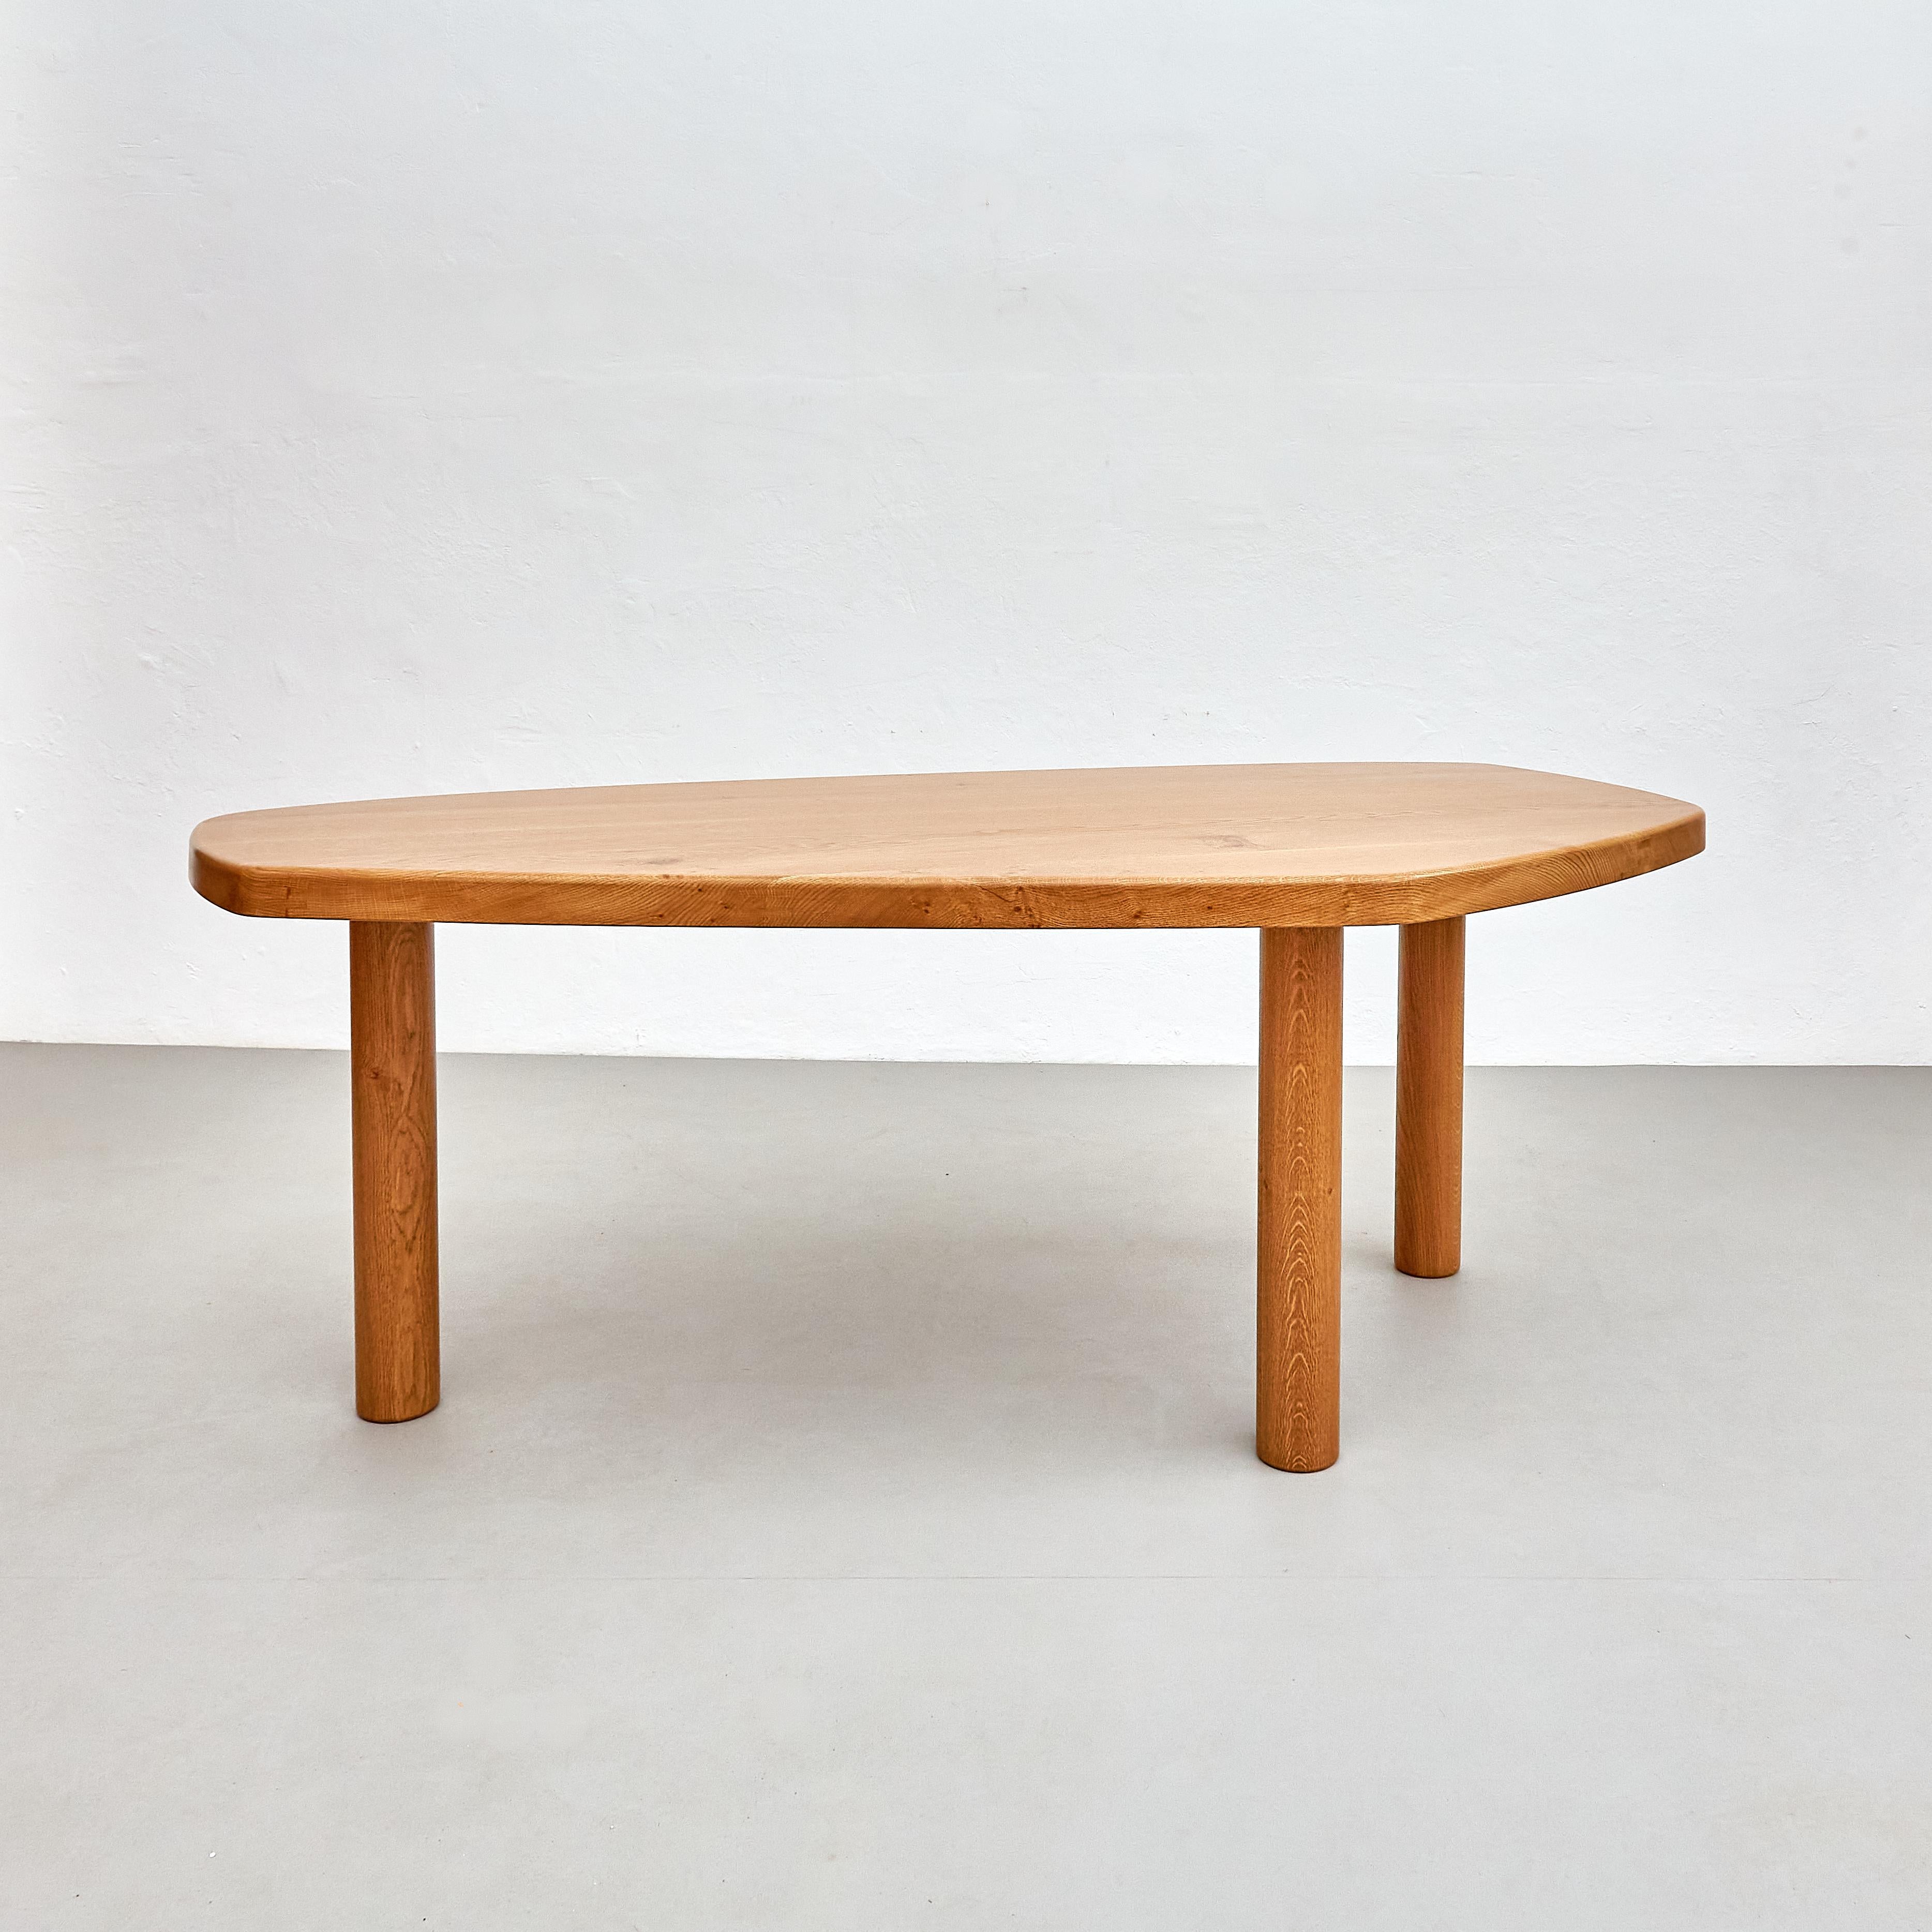 Spanish Contemporary Dada Est. Oak Table - Artisan Crafted with Midcentury Design Charm For Sale